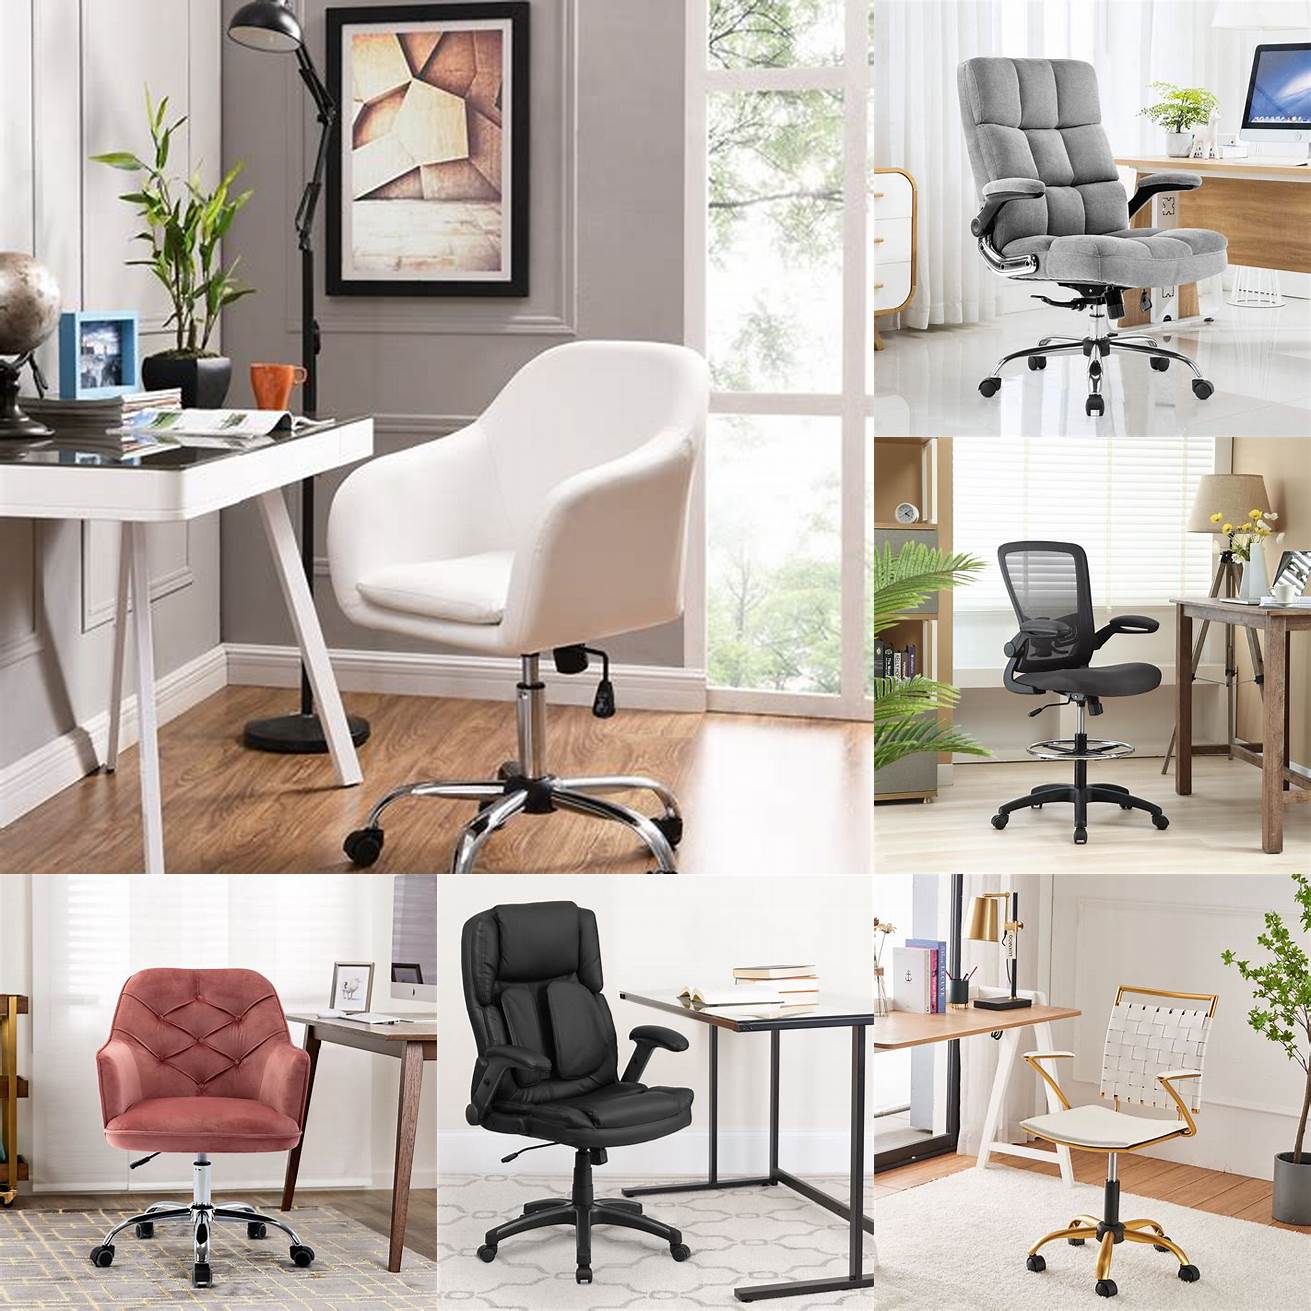 1 Comfortable and adjustable desks and chairs